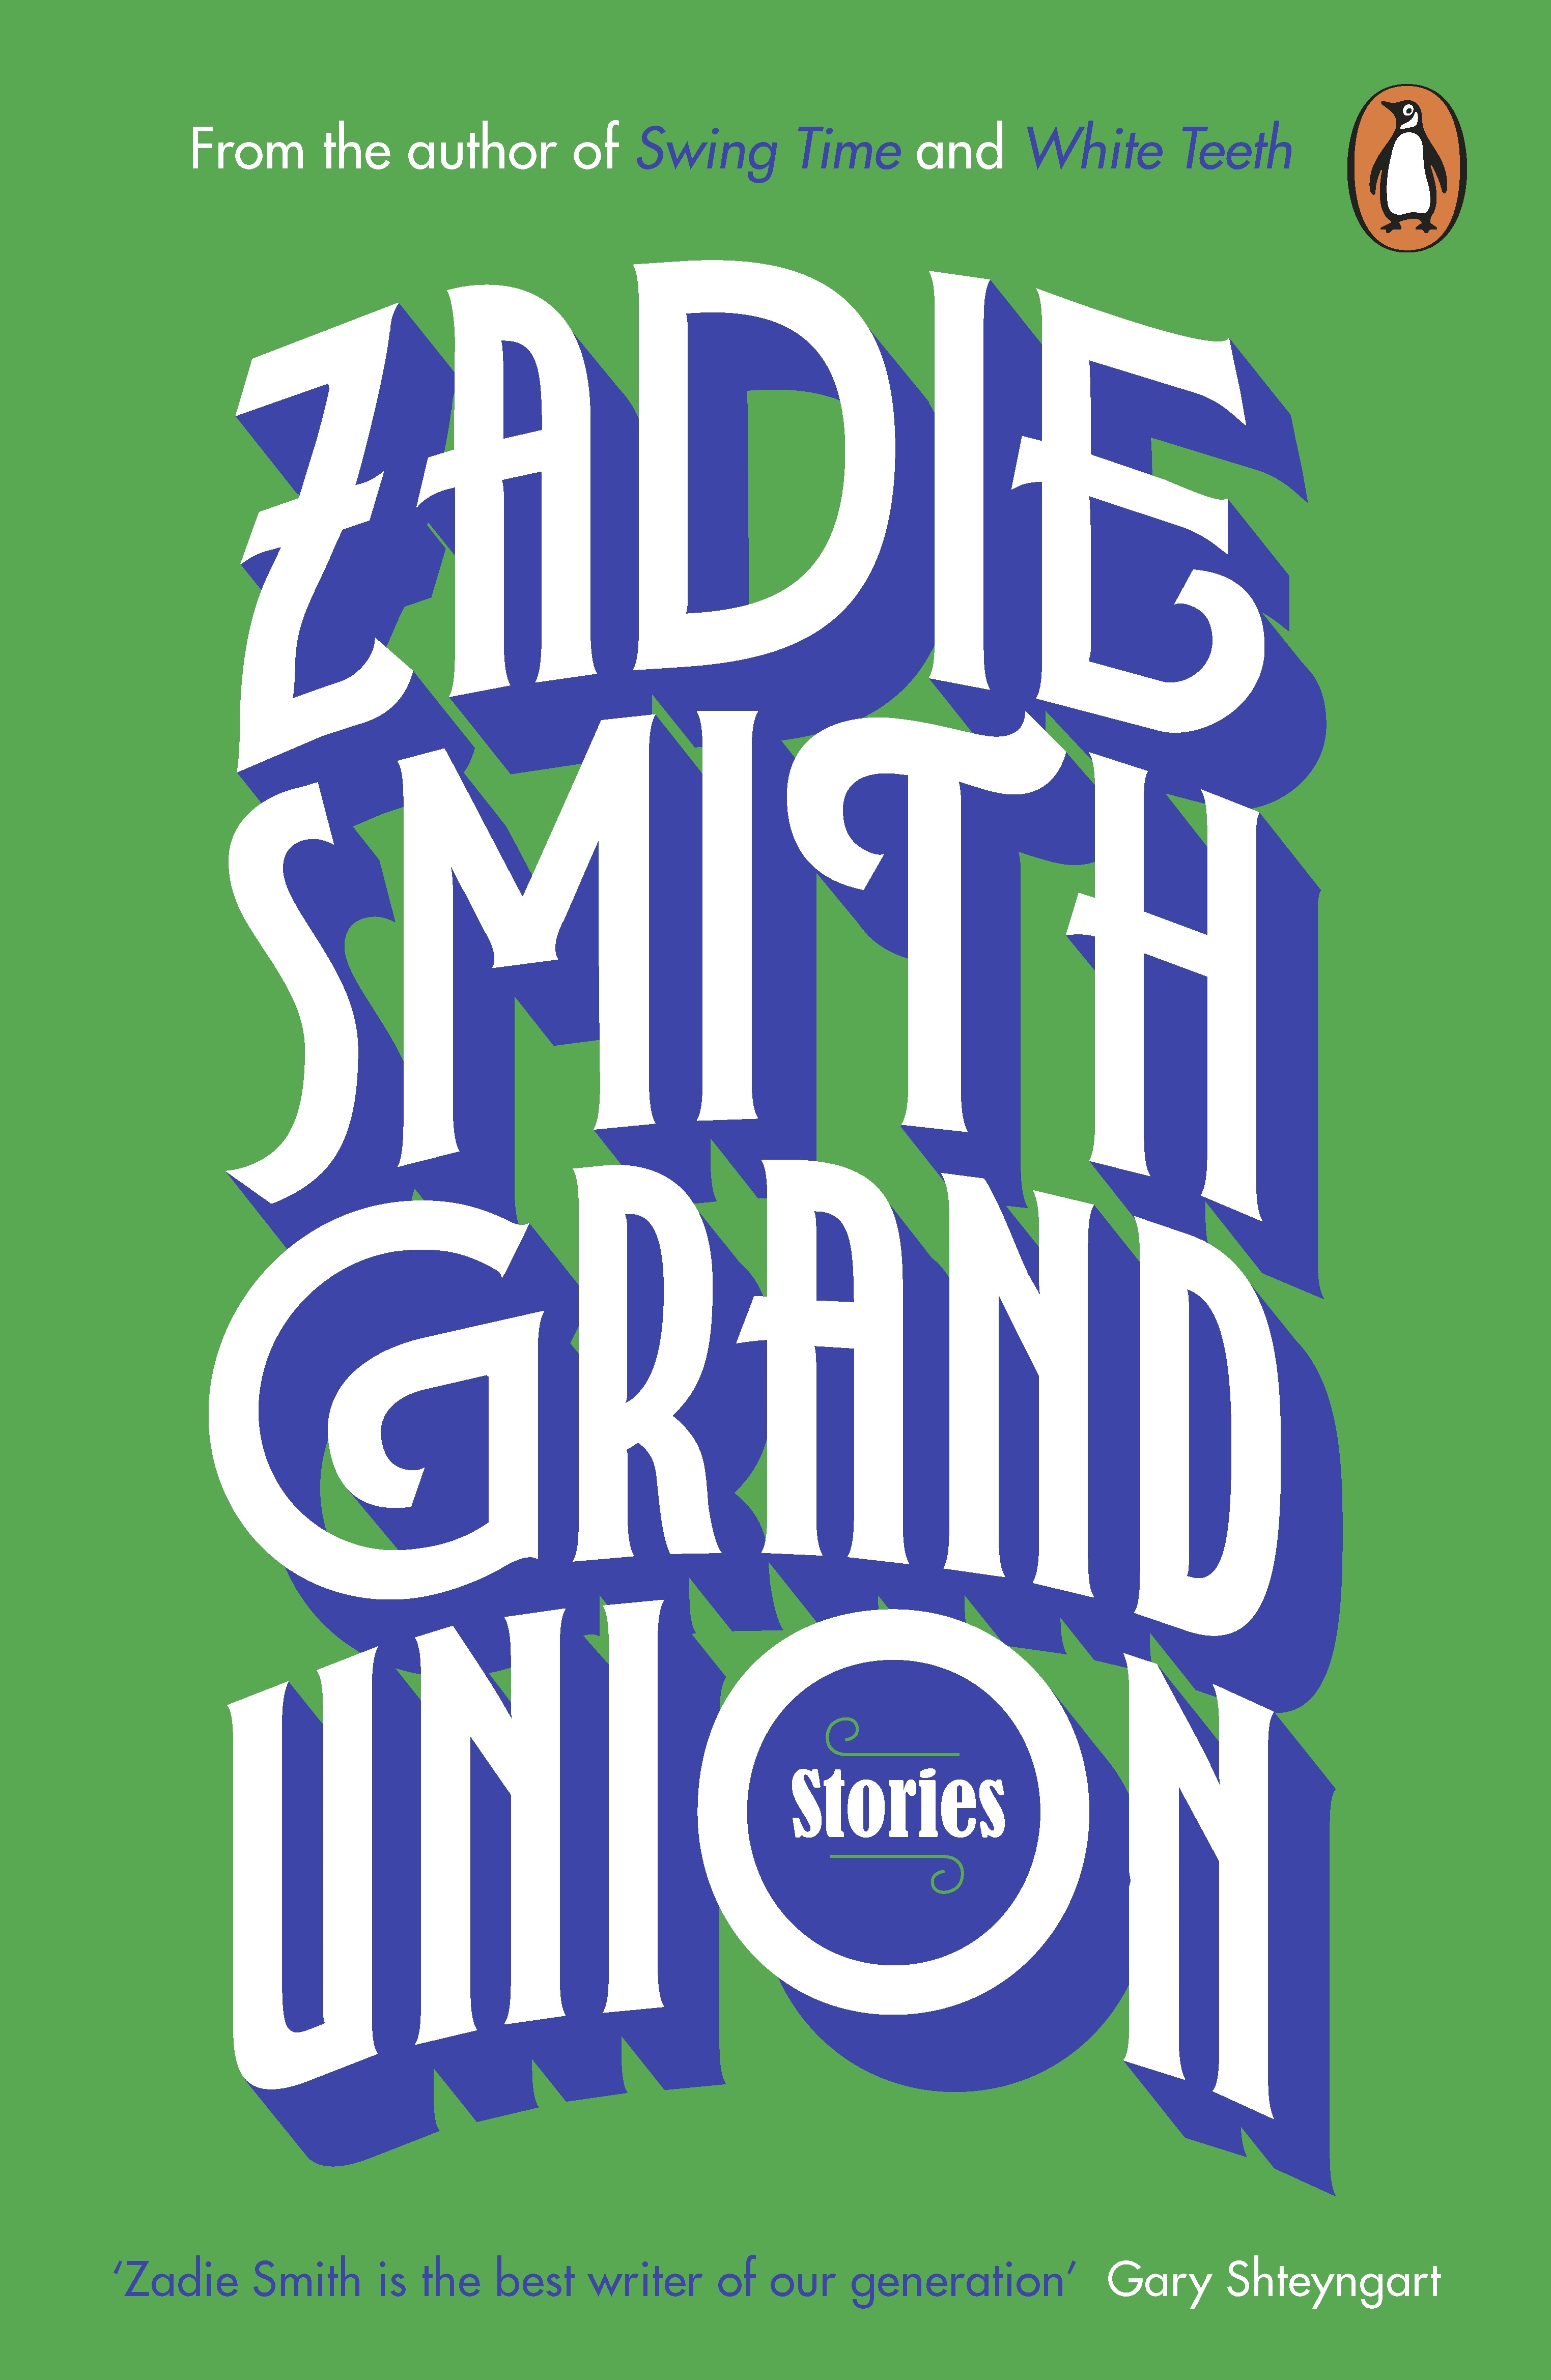 Book “Grand Union” by Zadie Smith — October 8, 2020